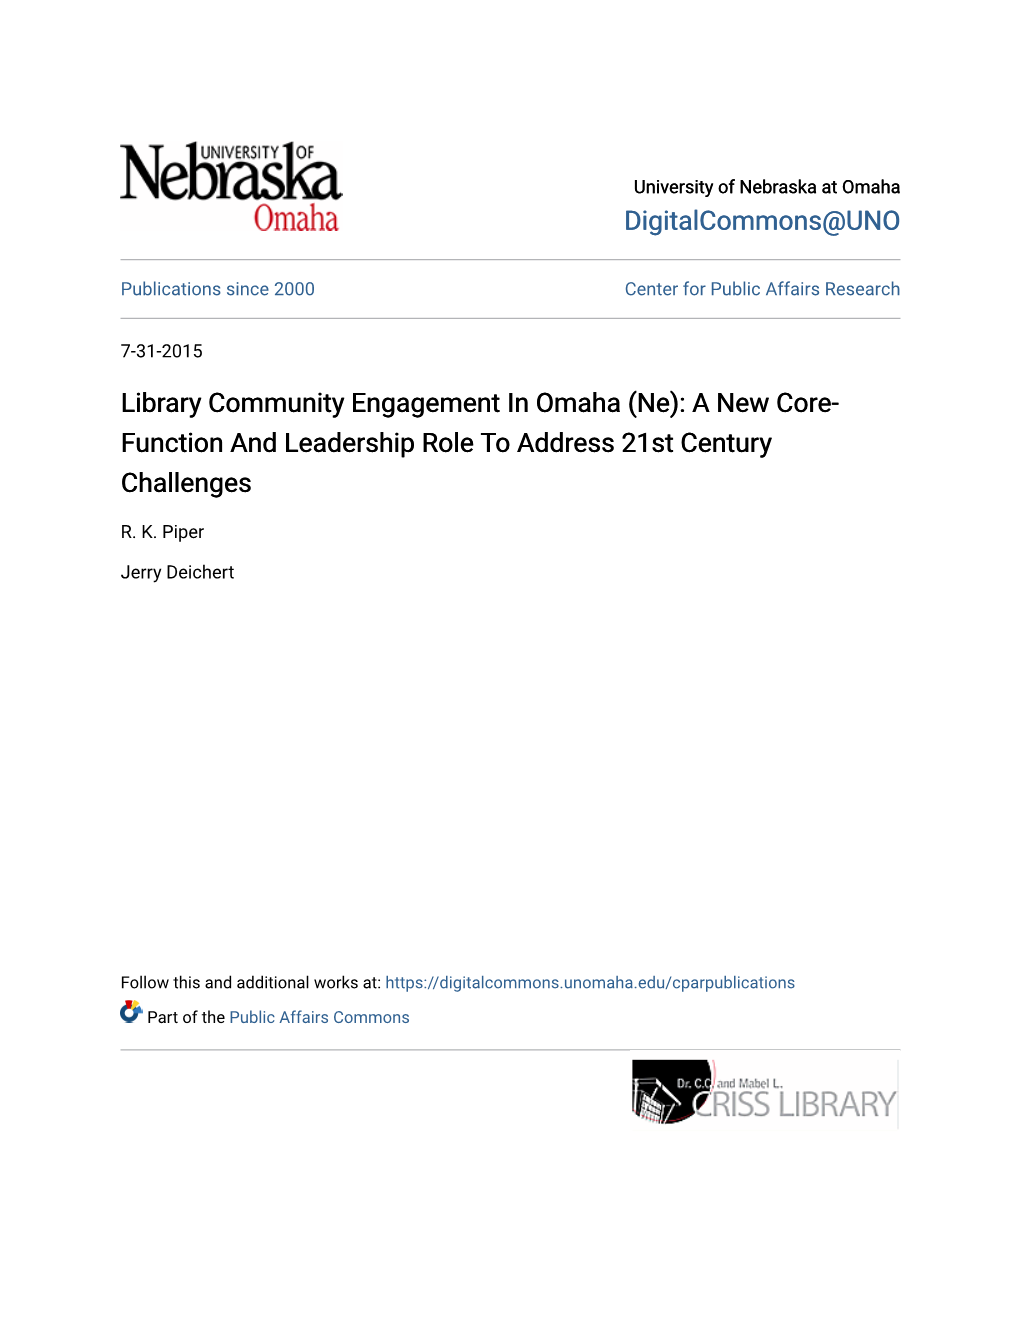 Library Community Engagement in Omaha (Ne): a New Core- Function and Leadership Role to Address 21St Century Challenges